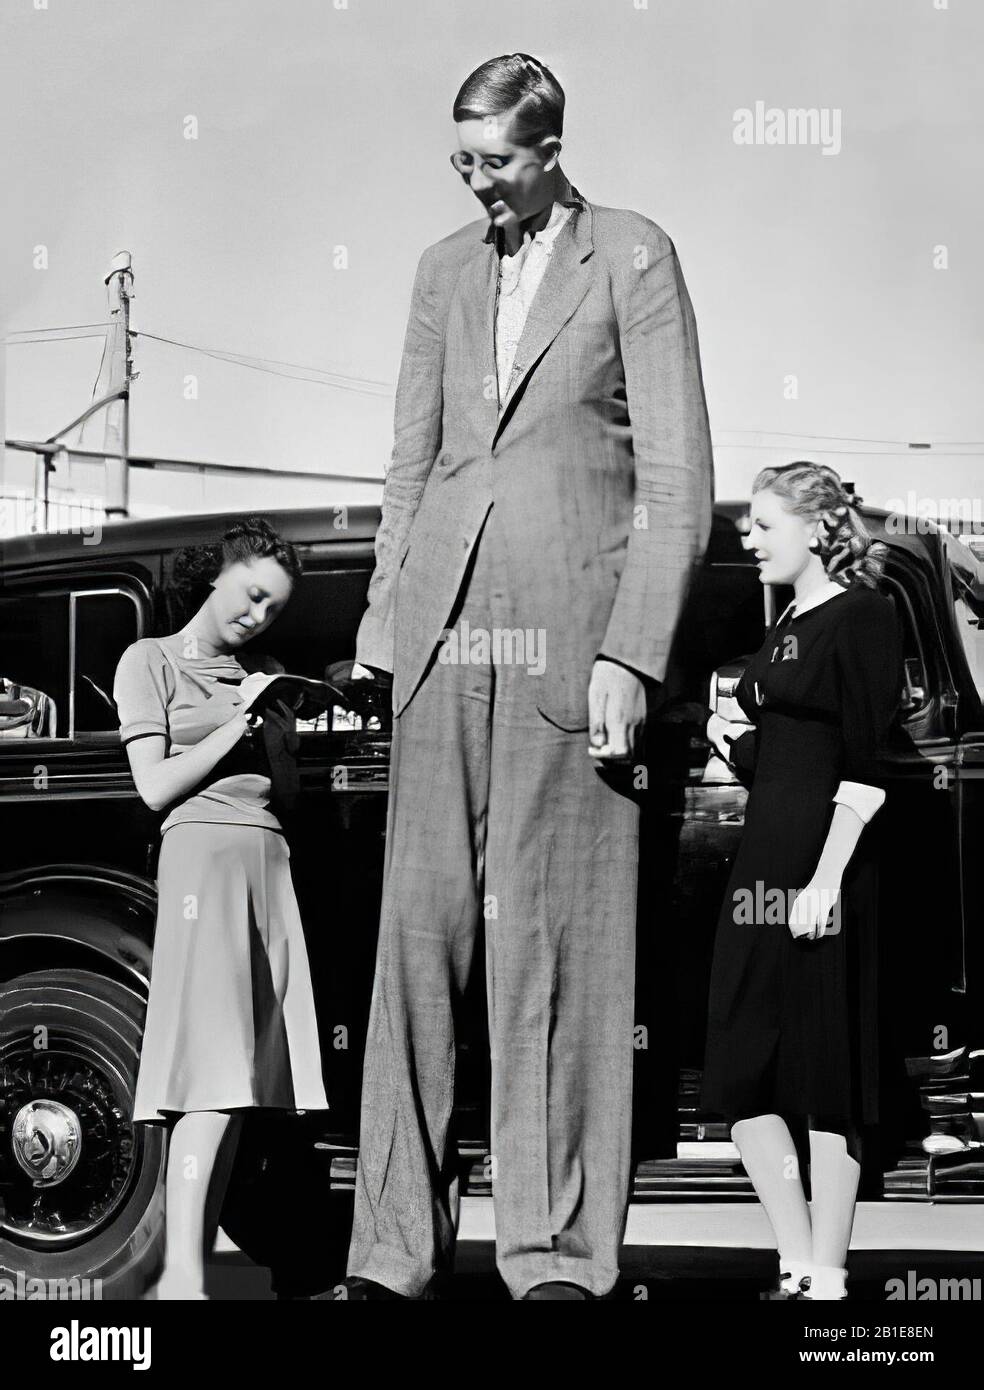 robert-wadlow-the-giant-of-illinois-having-reached-a-height-of-8-ft-11-in-wadlow-is-the-tallest-confirmed-person-to-have-ever-lived-2B1E8EN.jpg